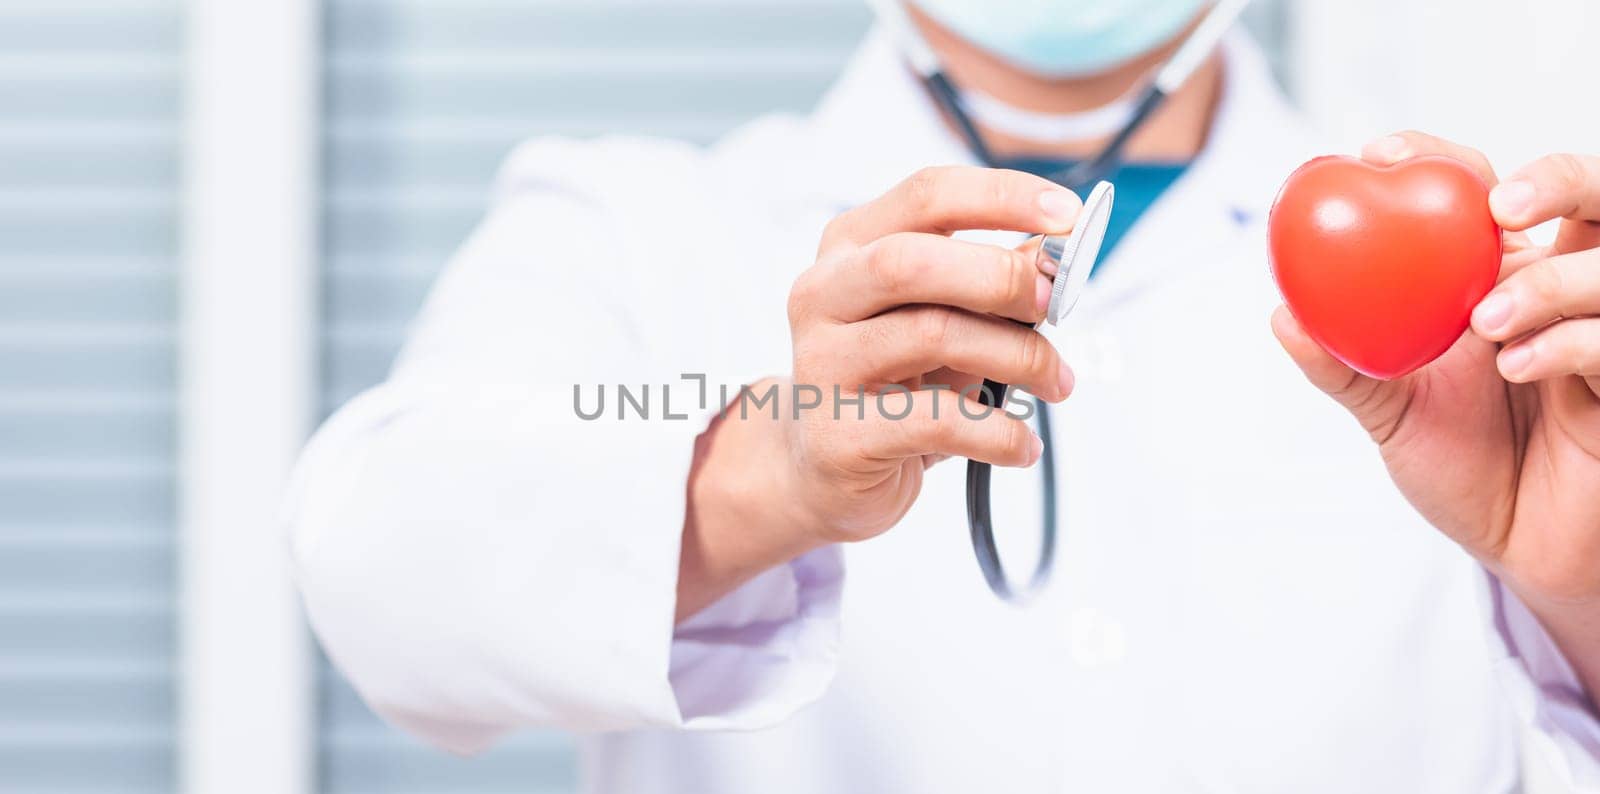 doctor wearing white coat standing holds his stethoscope on hand for listening examining red heart by Sorapop